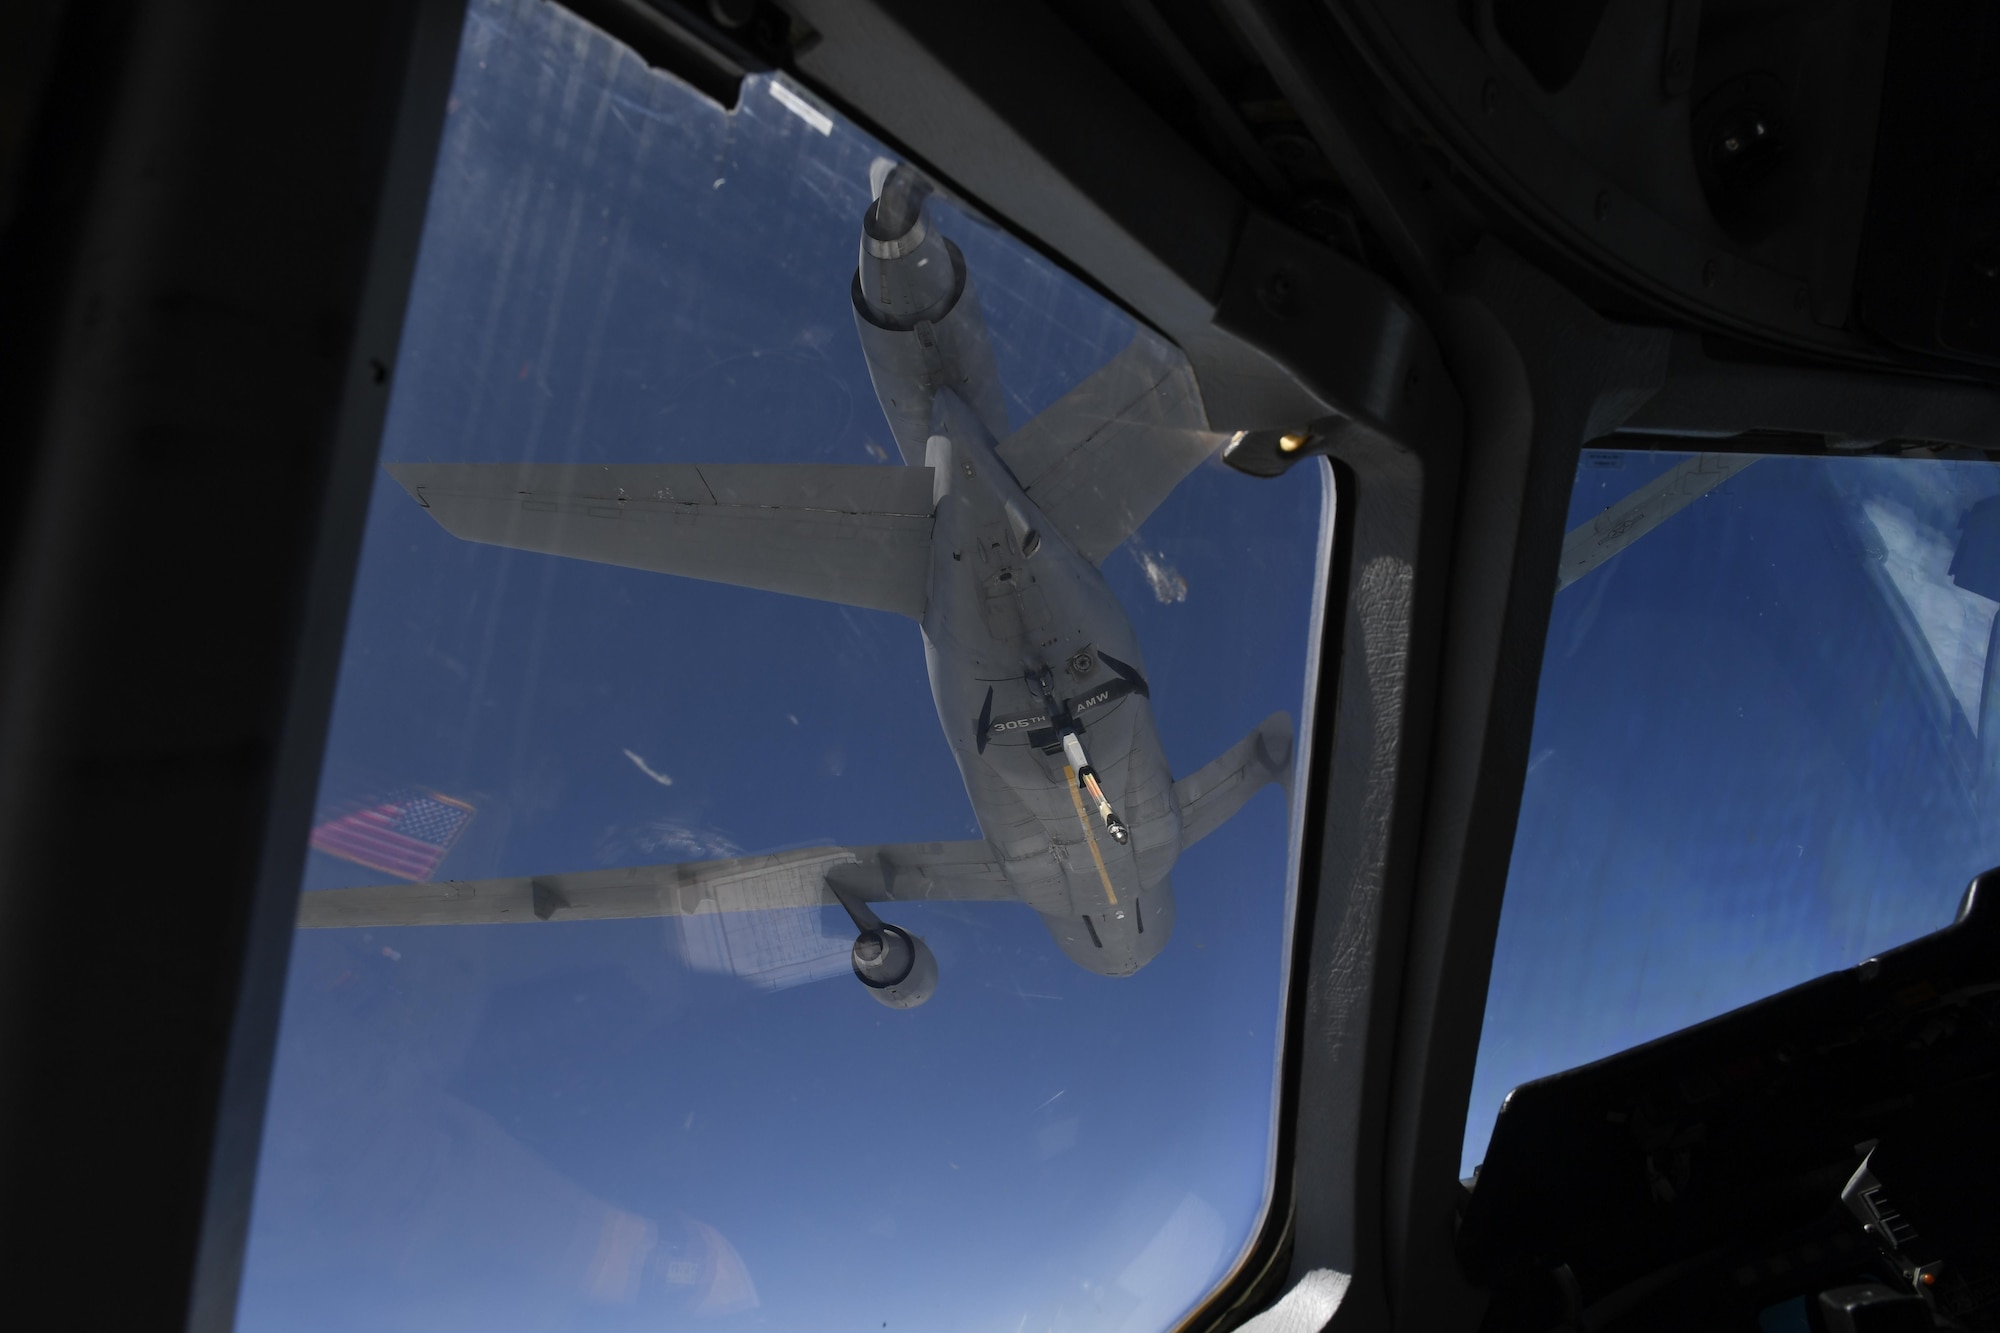 A KC-10 Extender from Joint Base McGuire-Dix-Lakehurst refuels another KC-10 Extender in formation during a training exercise enroute to support Global Reach for Talisman Sabre 17, July 9, 2017. The KC-10 Extender can refuel and be refueled, making it a valuable training tool for aircrew.